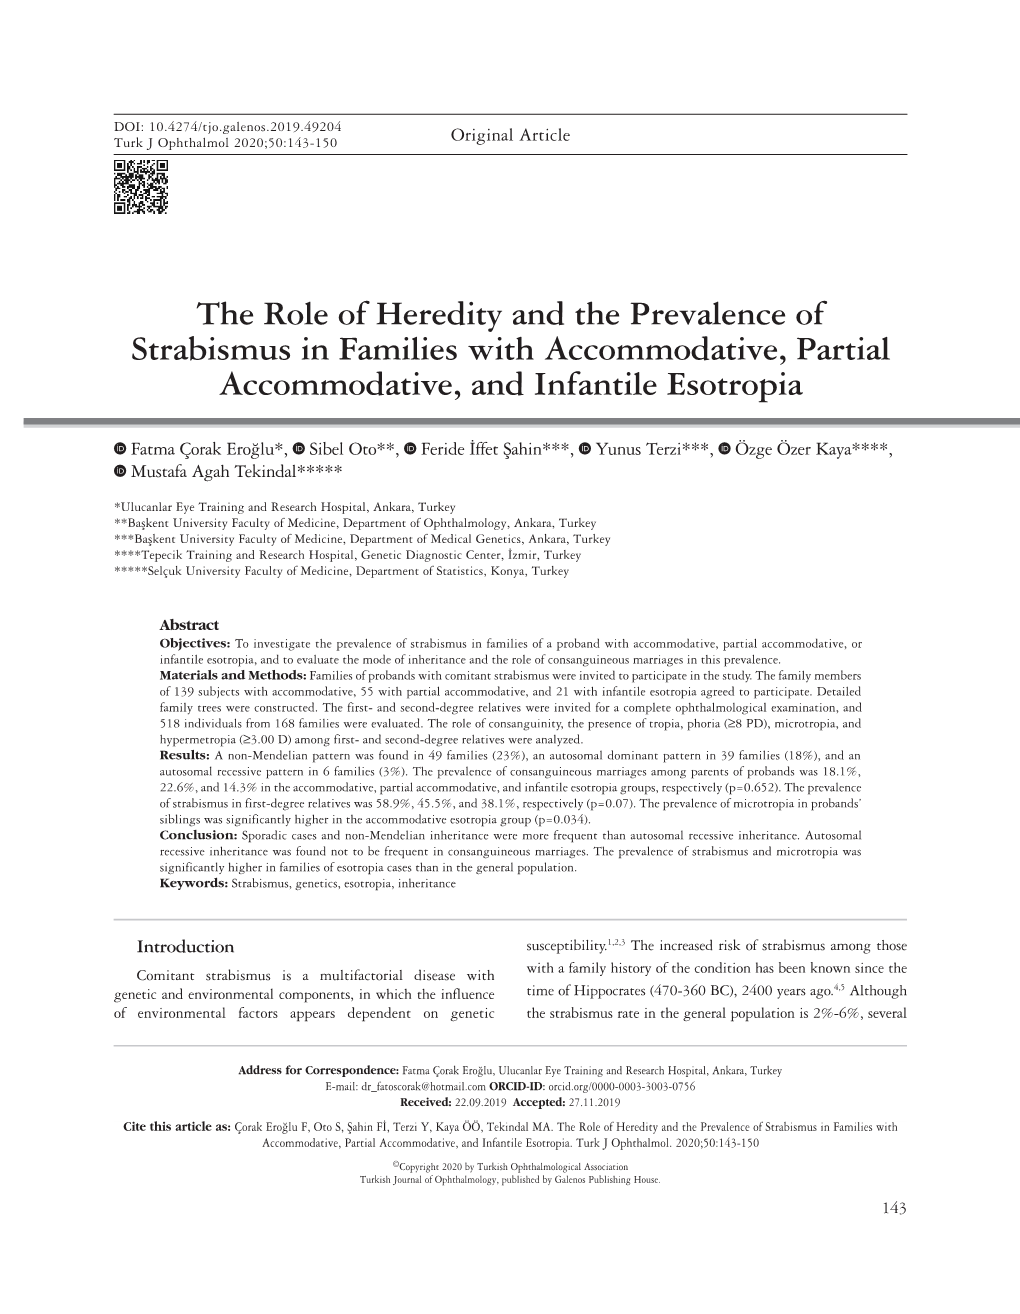 The Role of Heredity and the Prevalence of Strabismus in Families with Accommodative, Partial Accommodative, and Infantile Esotropia